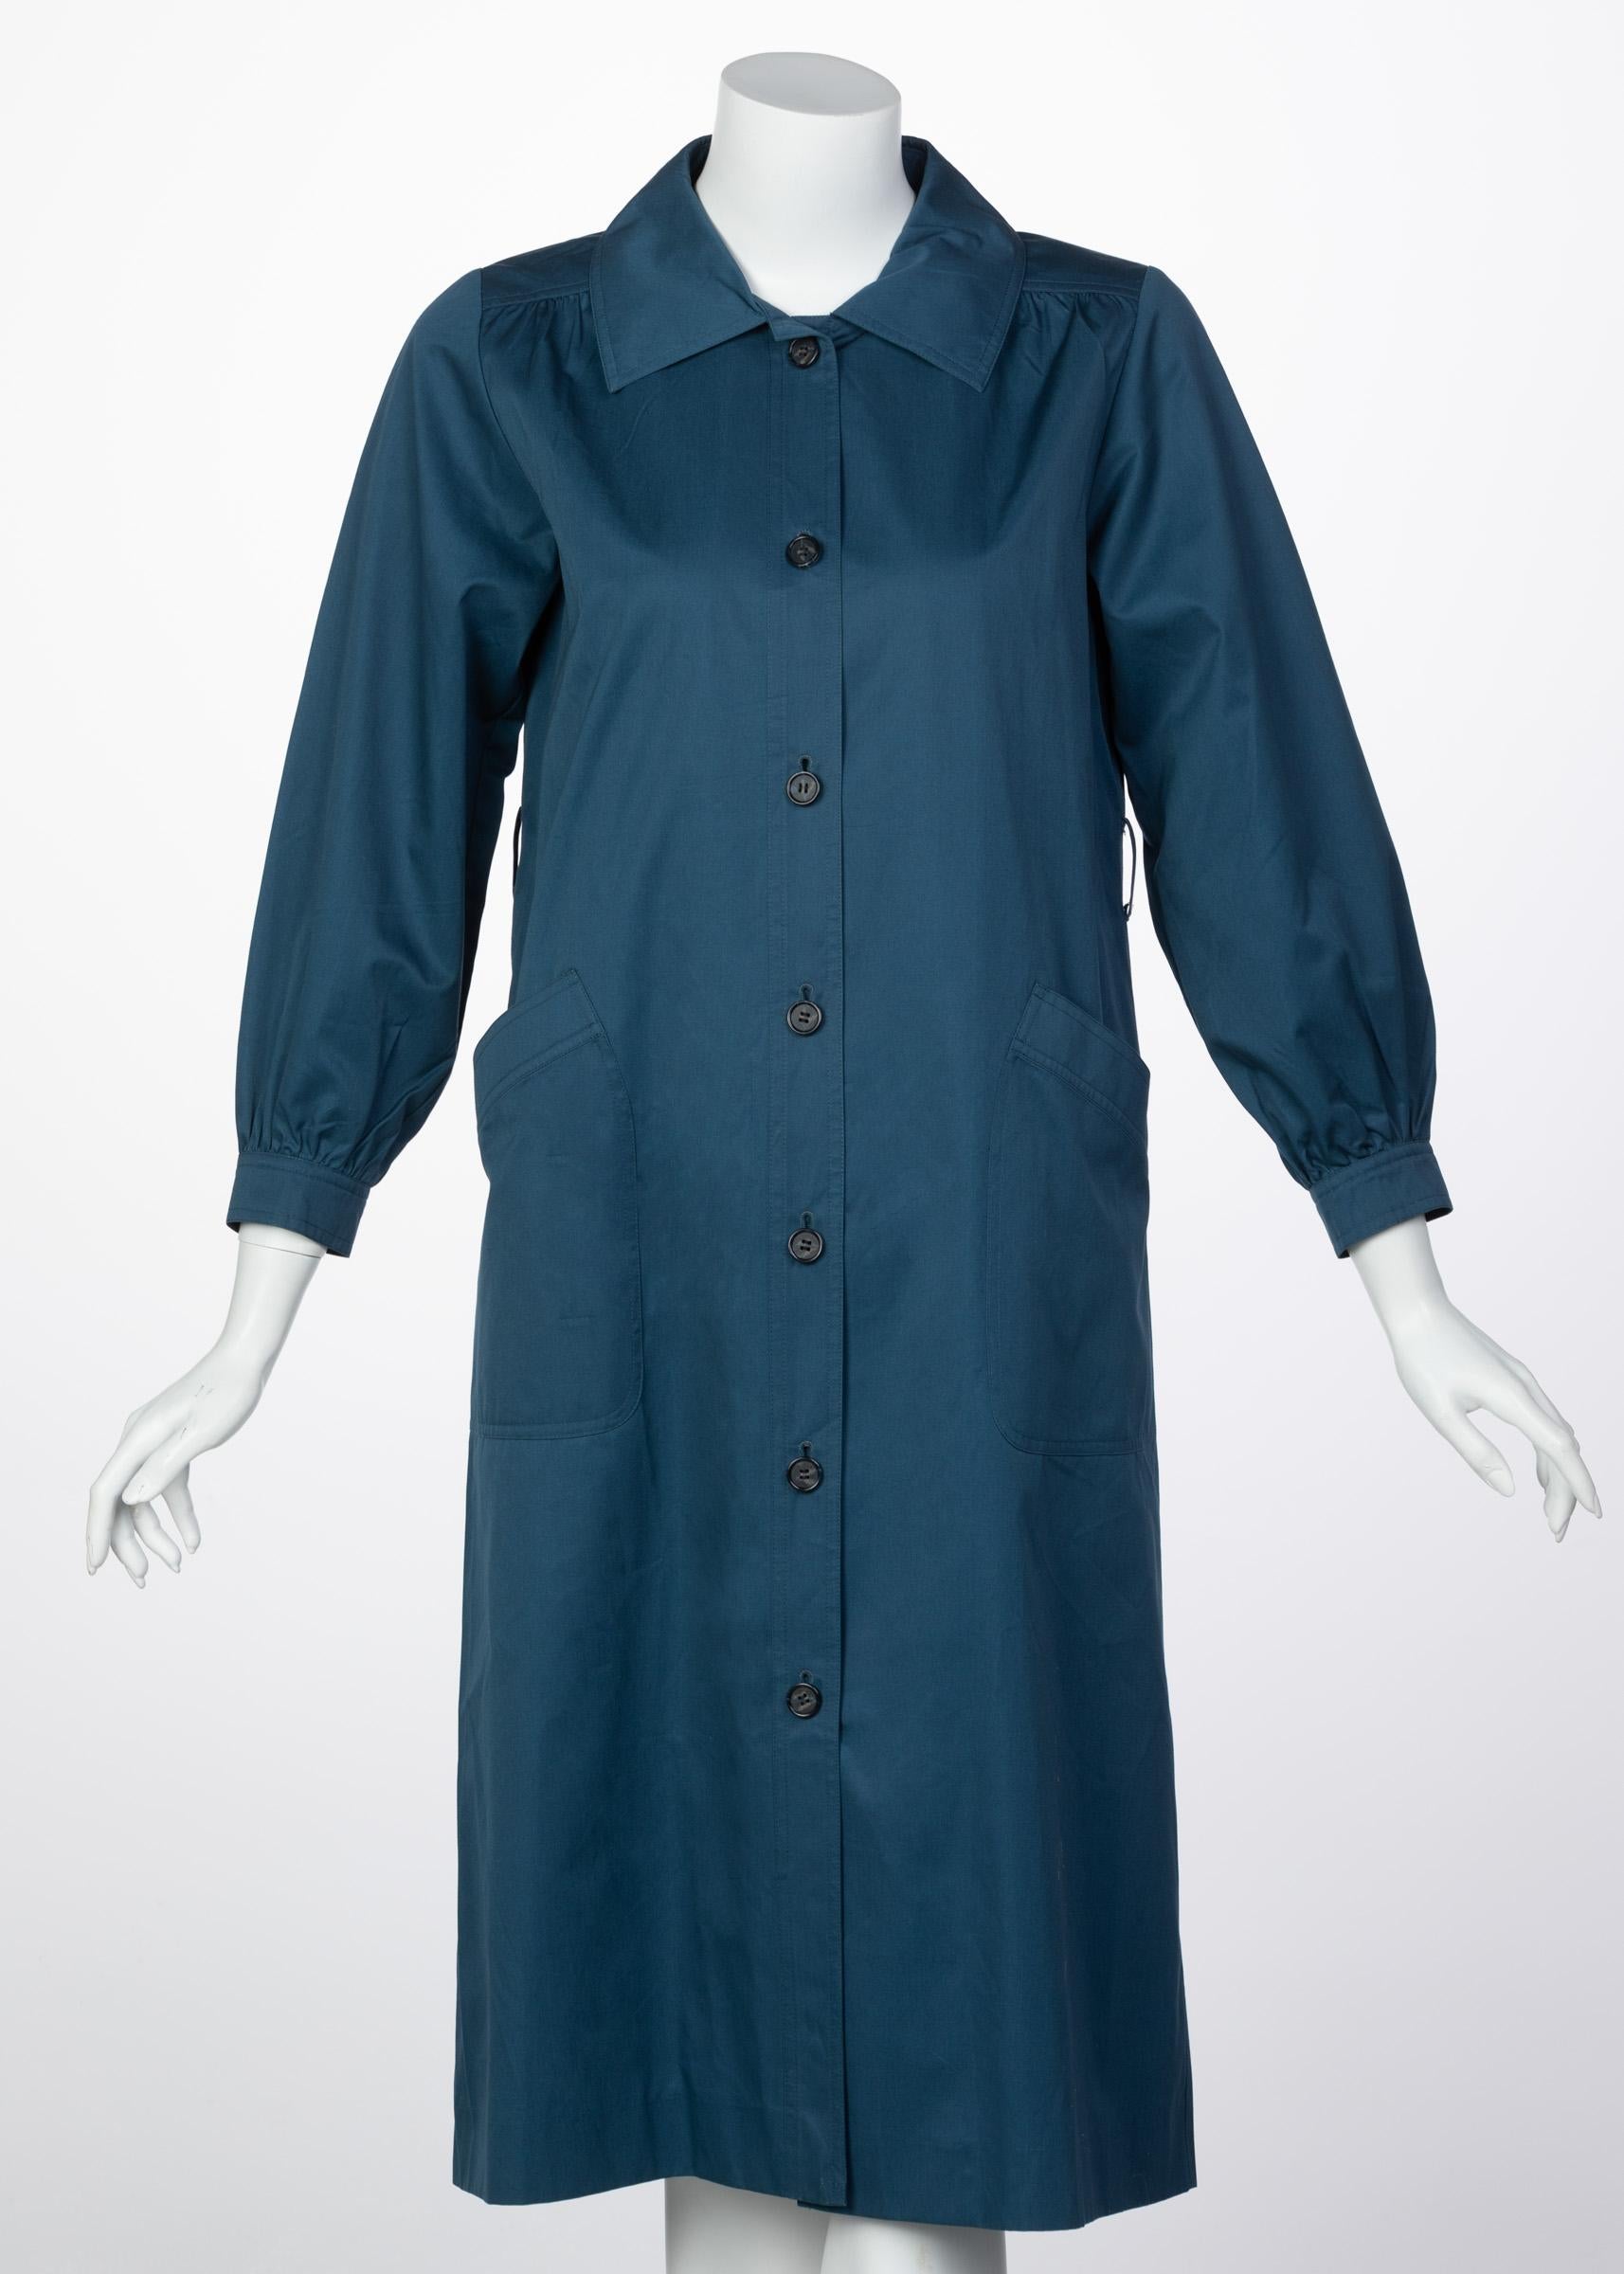 Yves Saint Laurent French Blue Belted Cotton Trench Coat YSL, 1970s In Excellent Condition For Sale In Boca Raton, FL